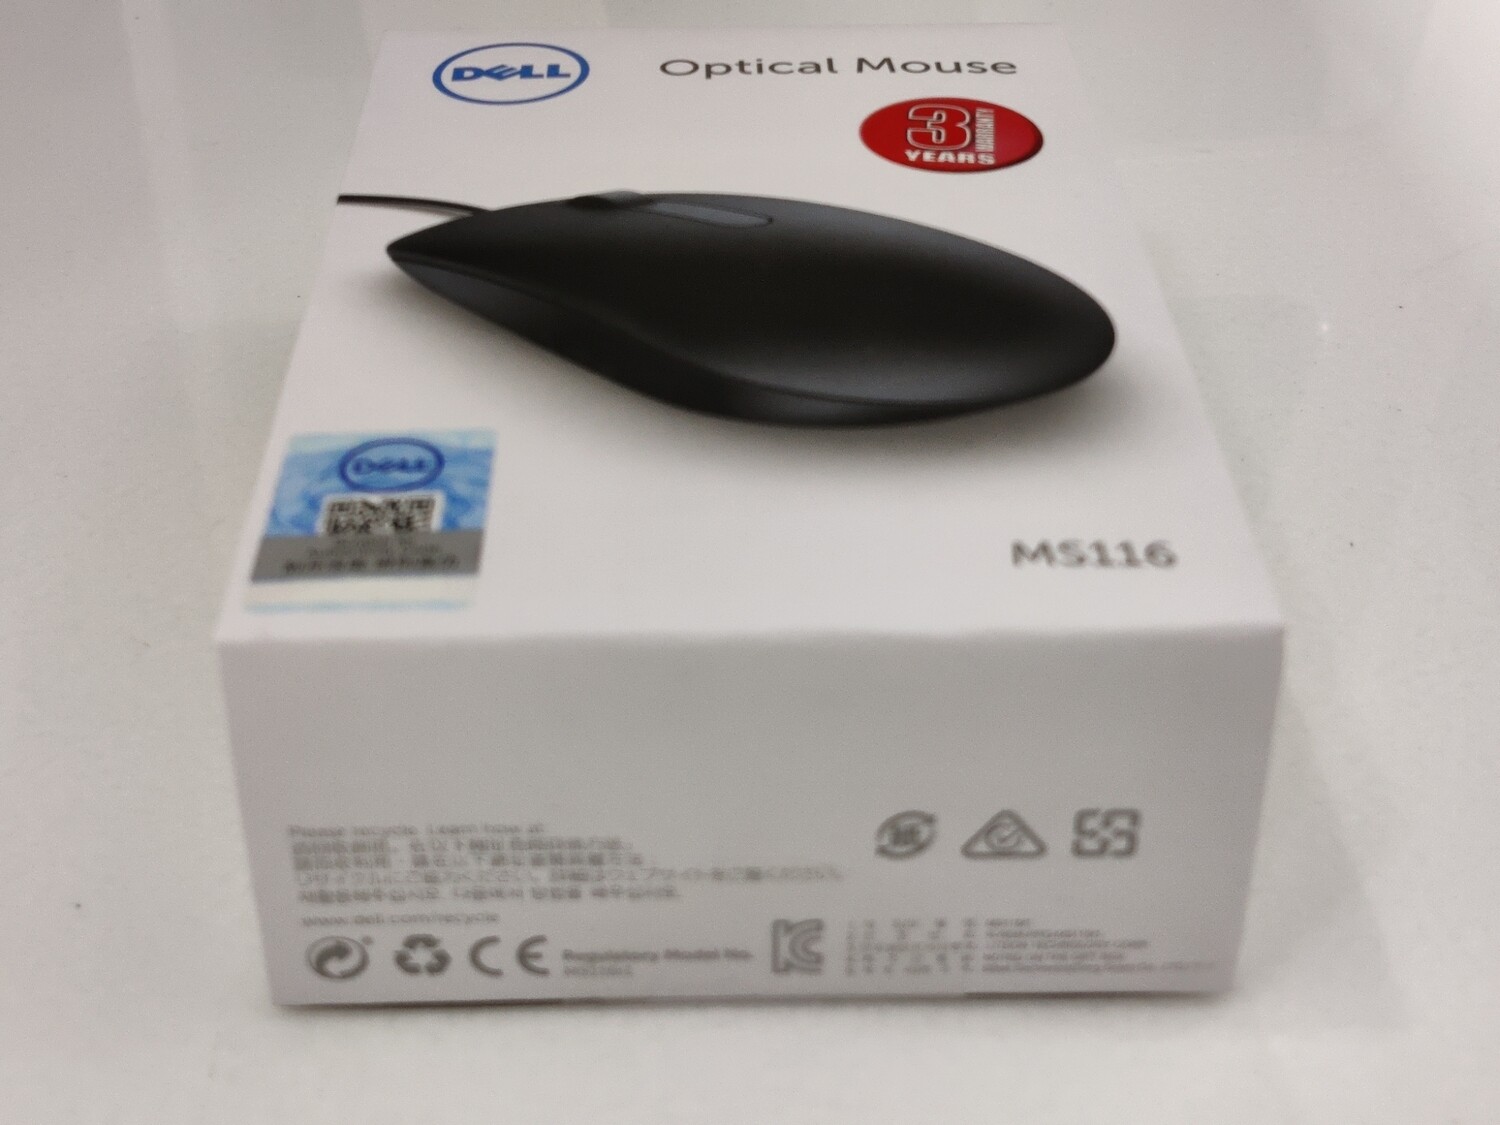  - Dell MS116 Optical USB Mouse